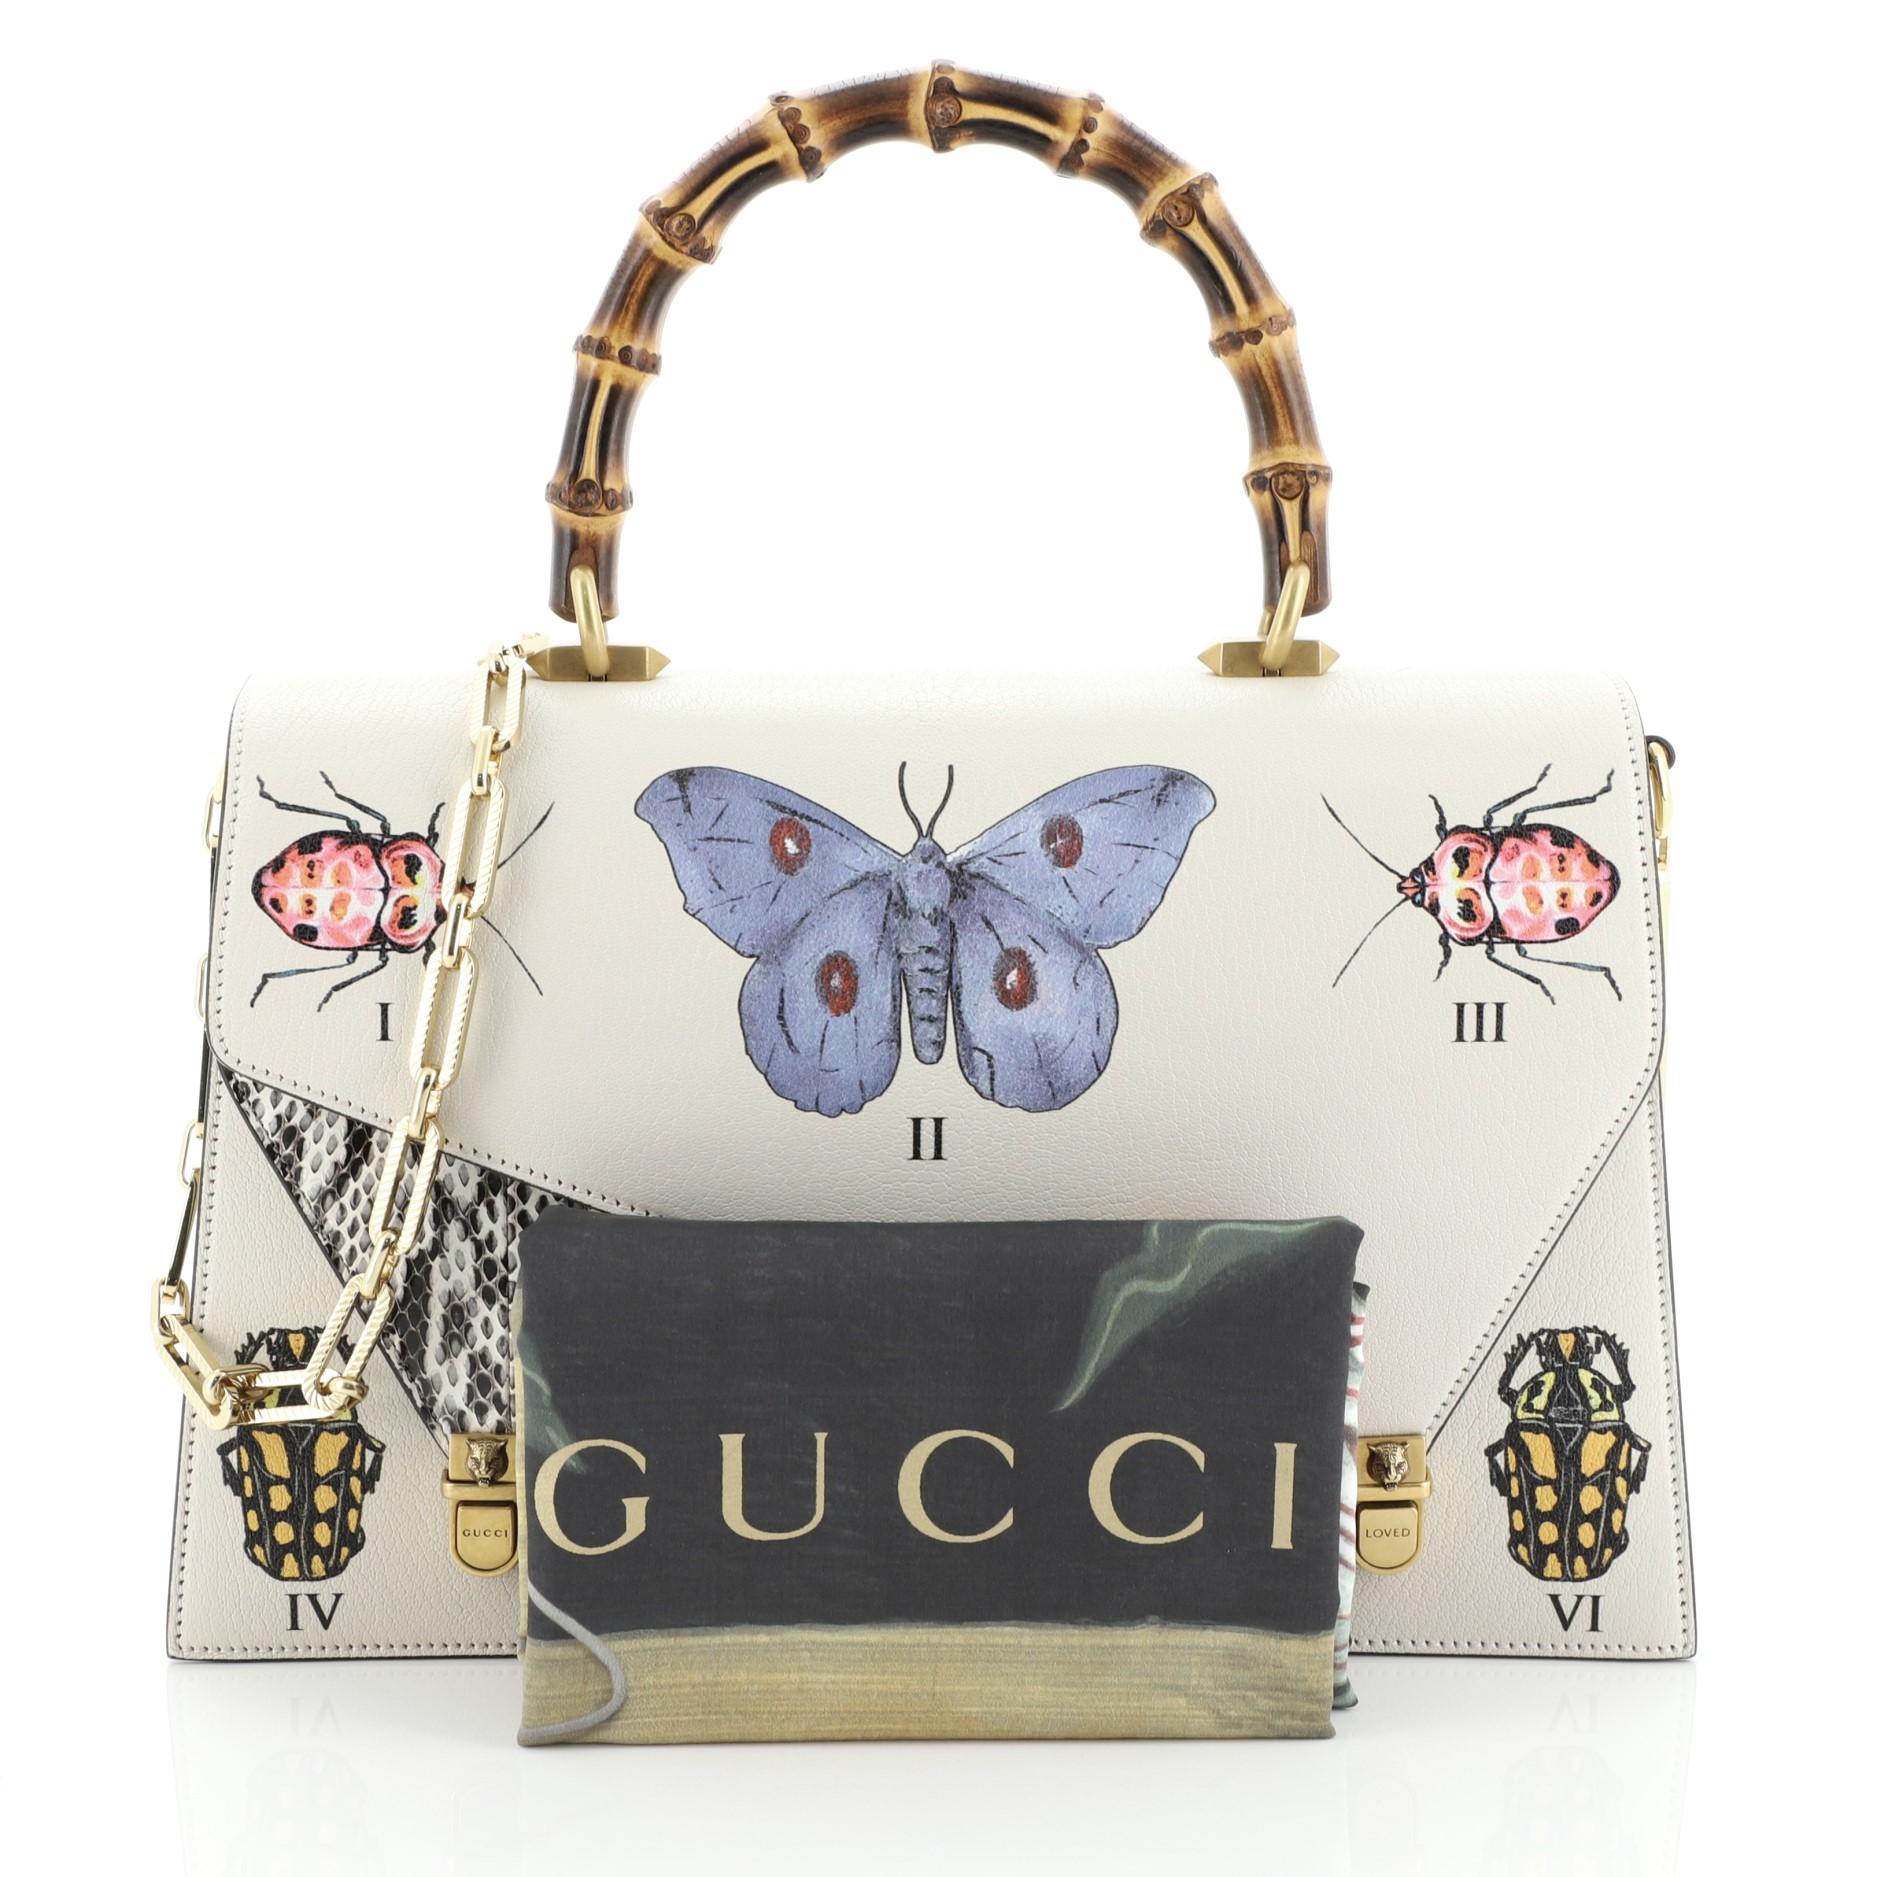 This Gucci Ottilia Top Handle Bag Painted Leather with Snakeskin Medium, crafted in multicolor printed and neutral leather, features a bamboo top handle, overlapping double flap, hand-painted butterflies and insect and aged gold-tone hardware. Its